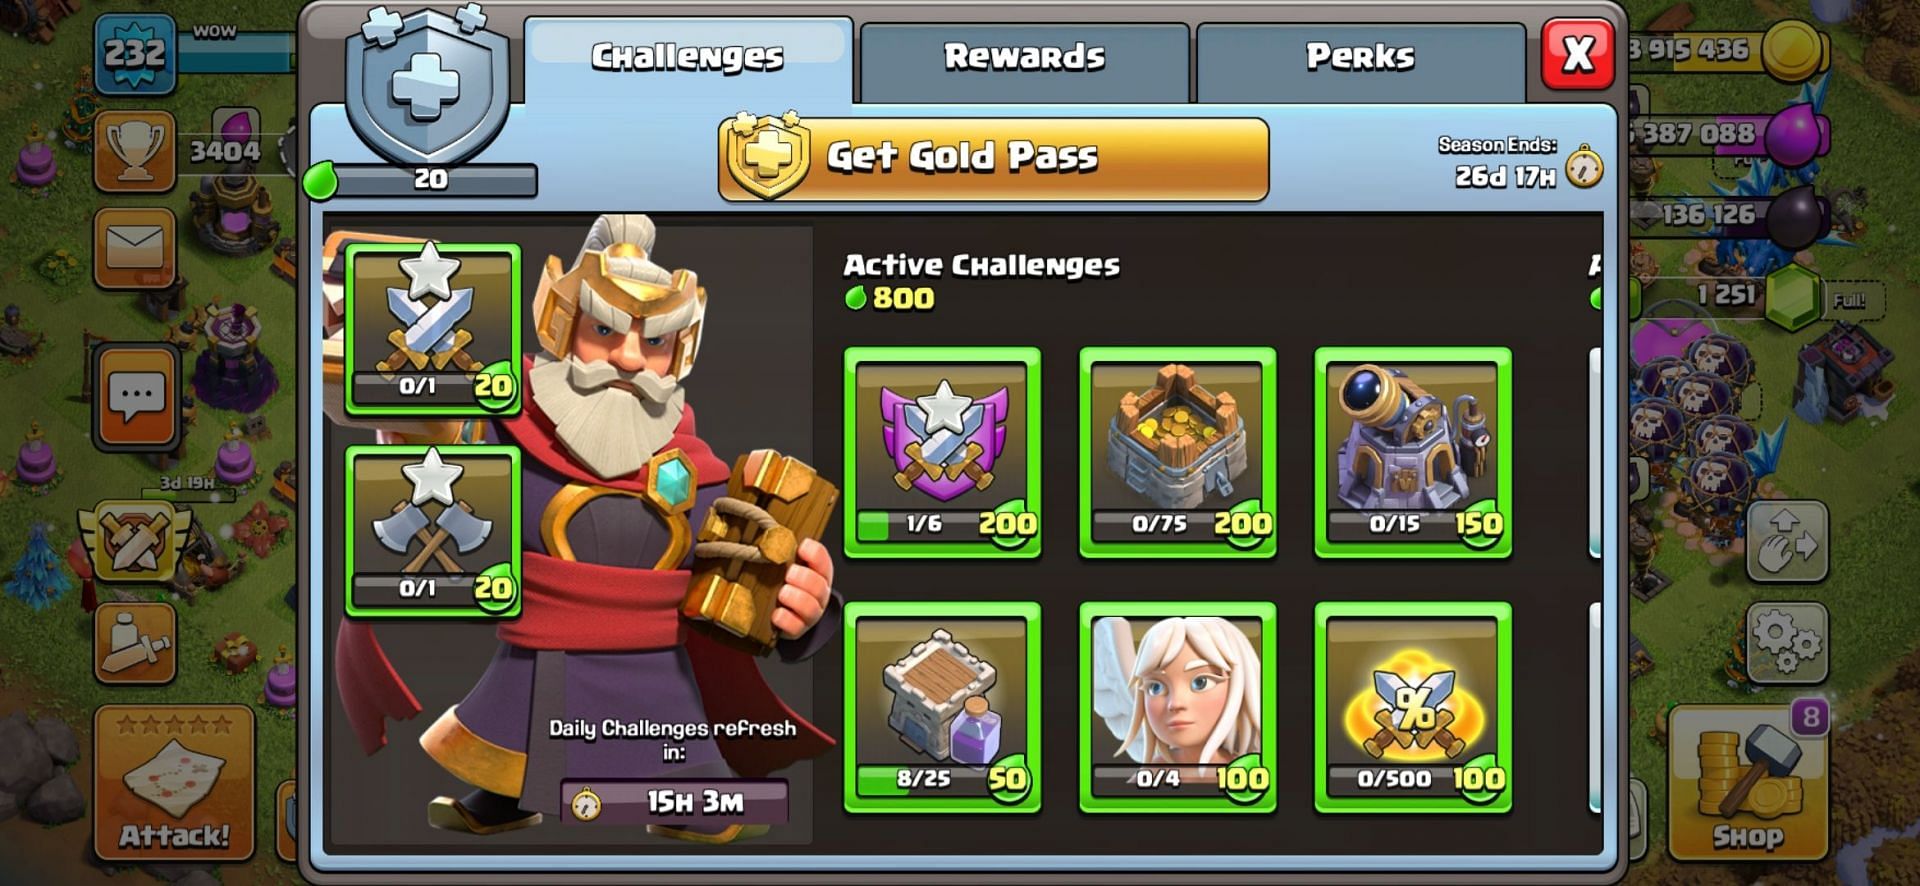 How to get Gold Pass in Clash of Clans